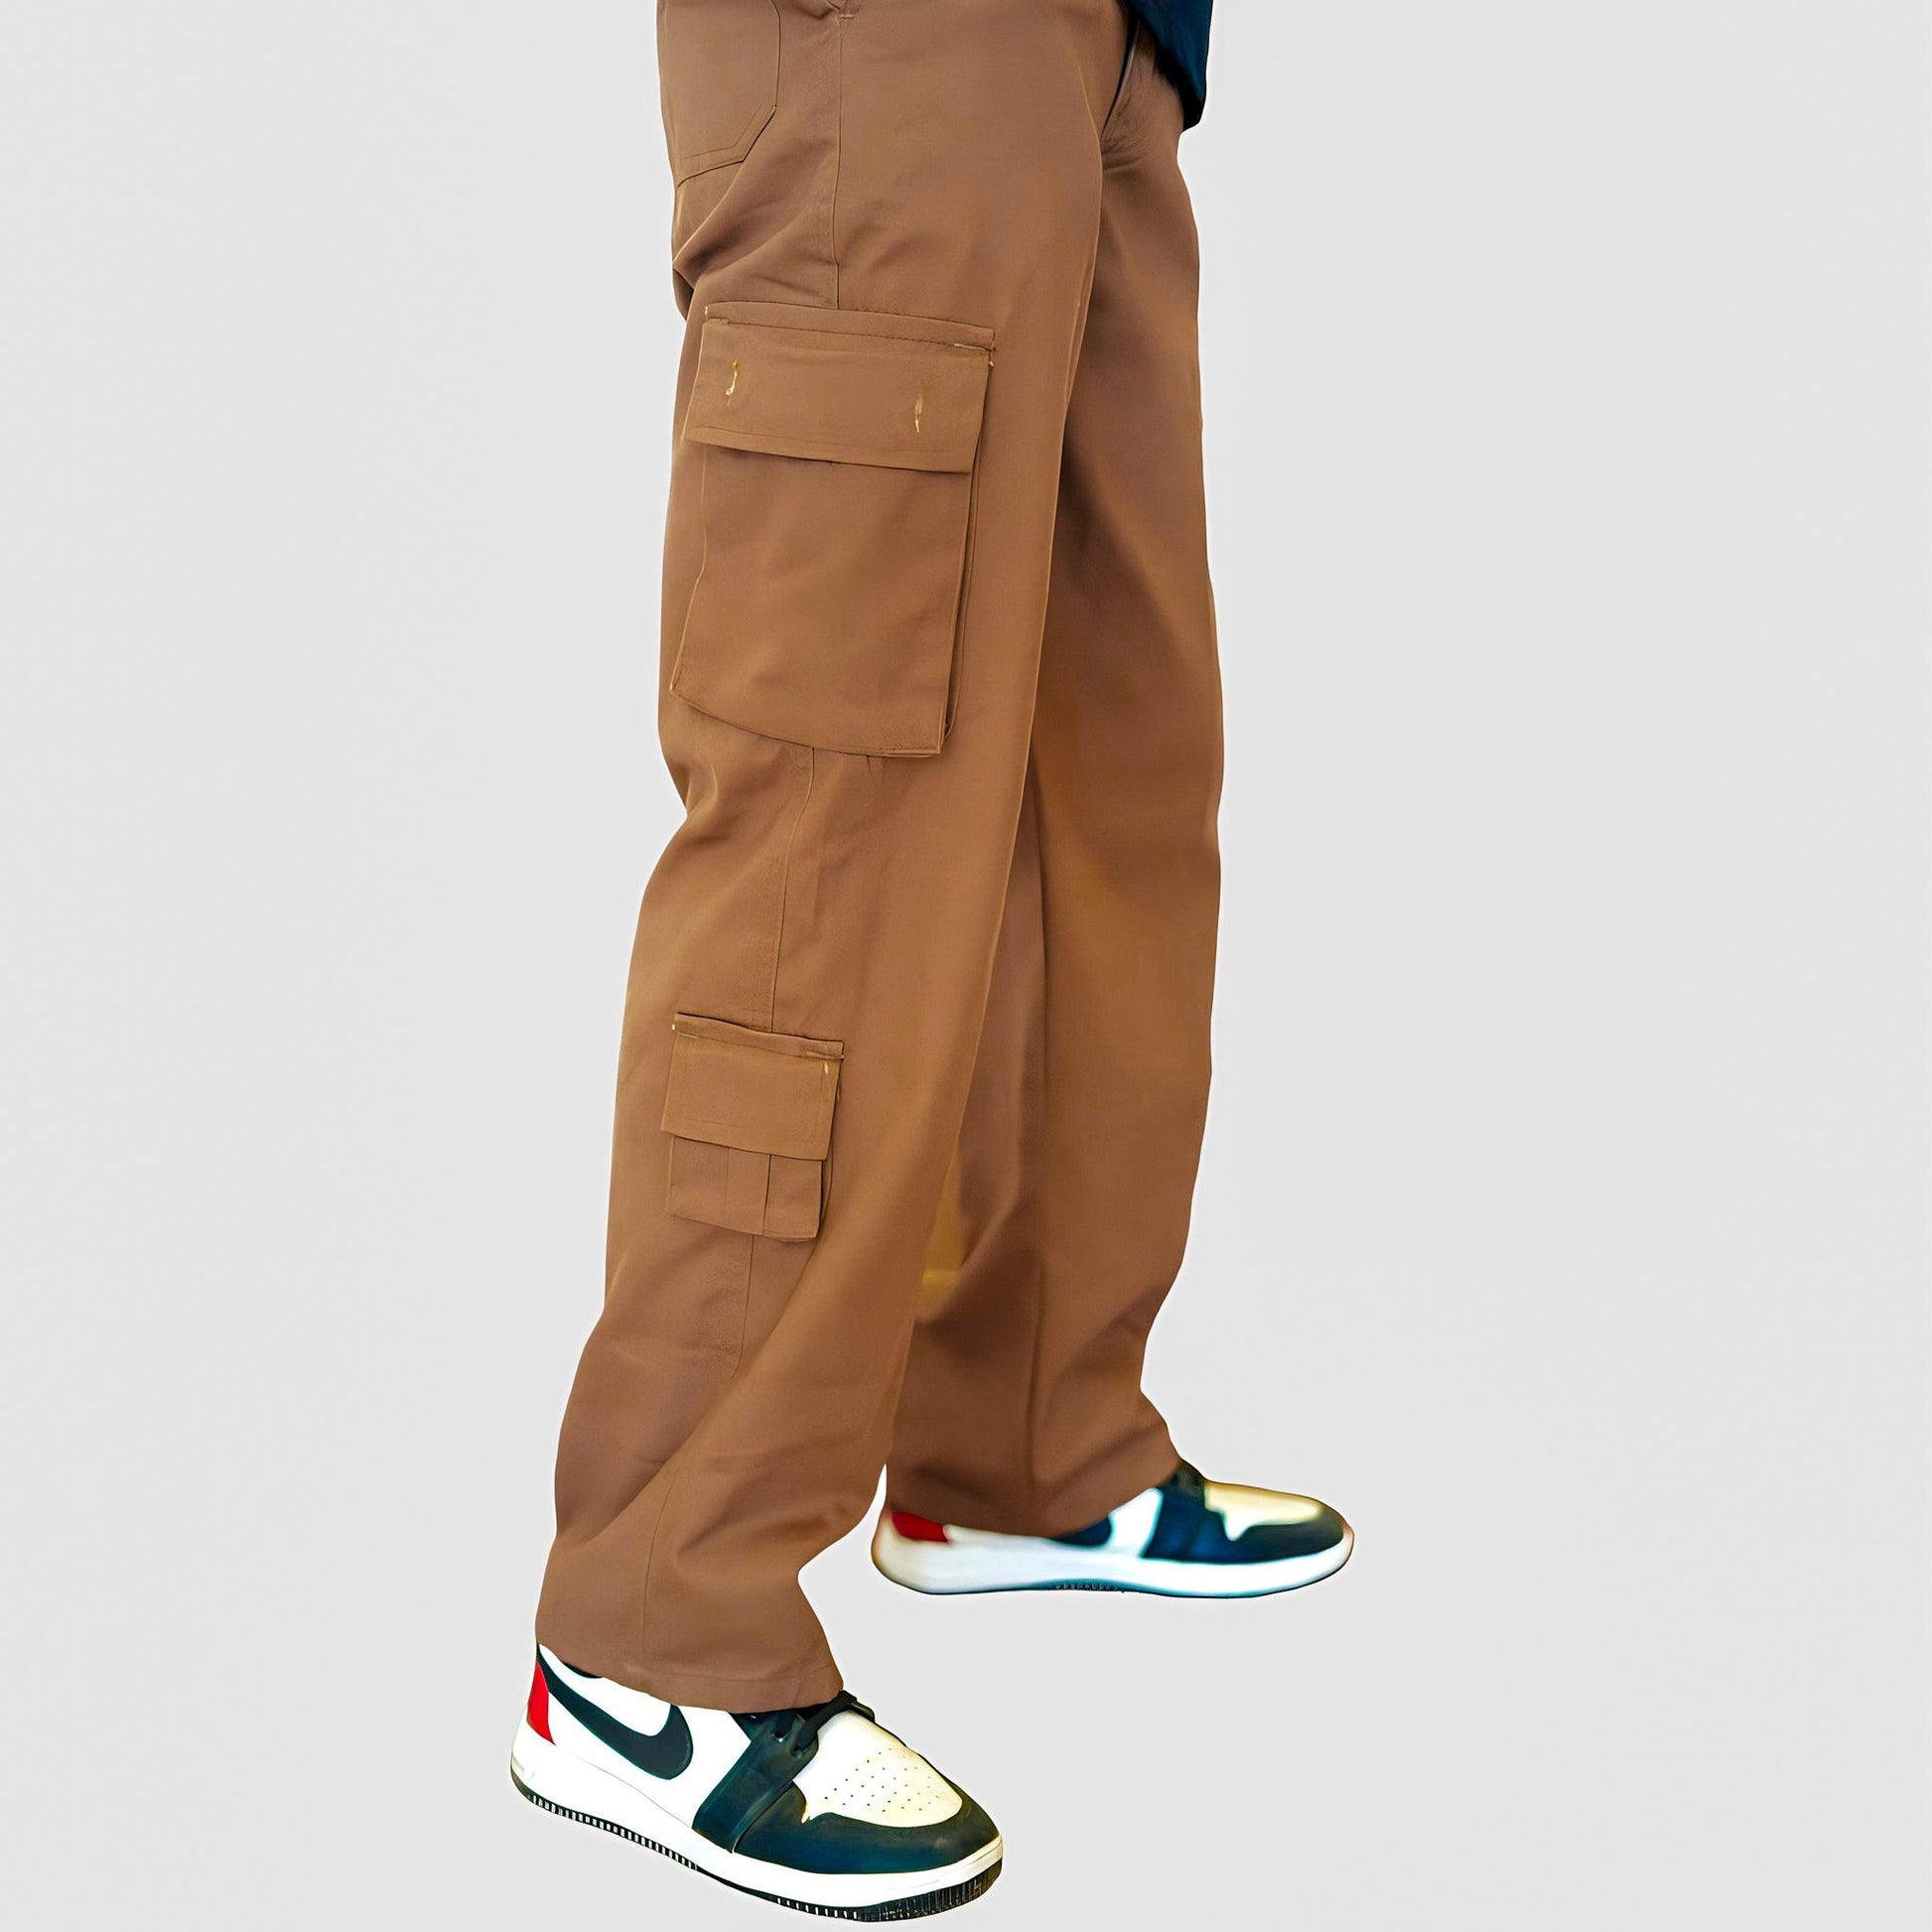 Female Olive Green Cargo Trousers (6 pockets) – Loopster